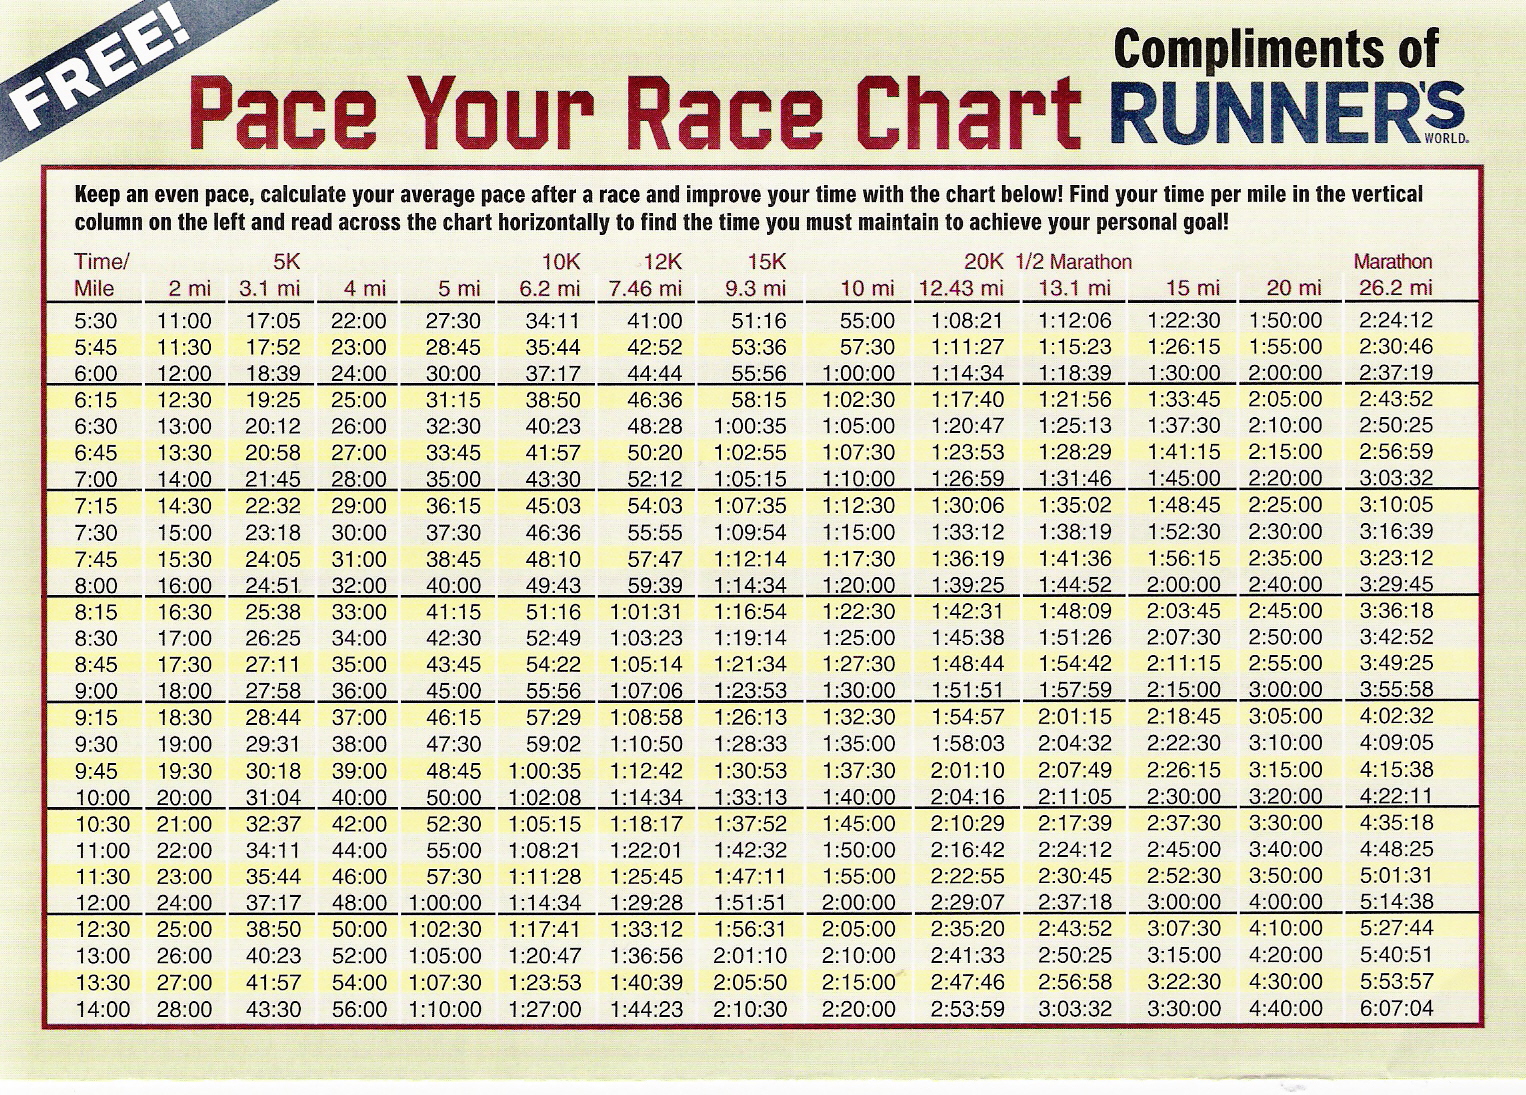 Running Time Predictor Chart